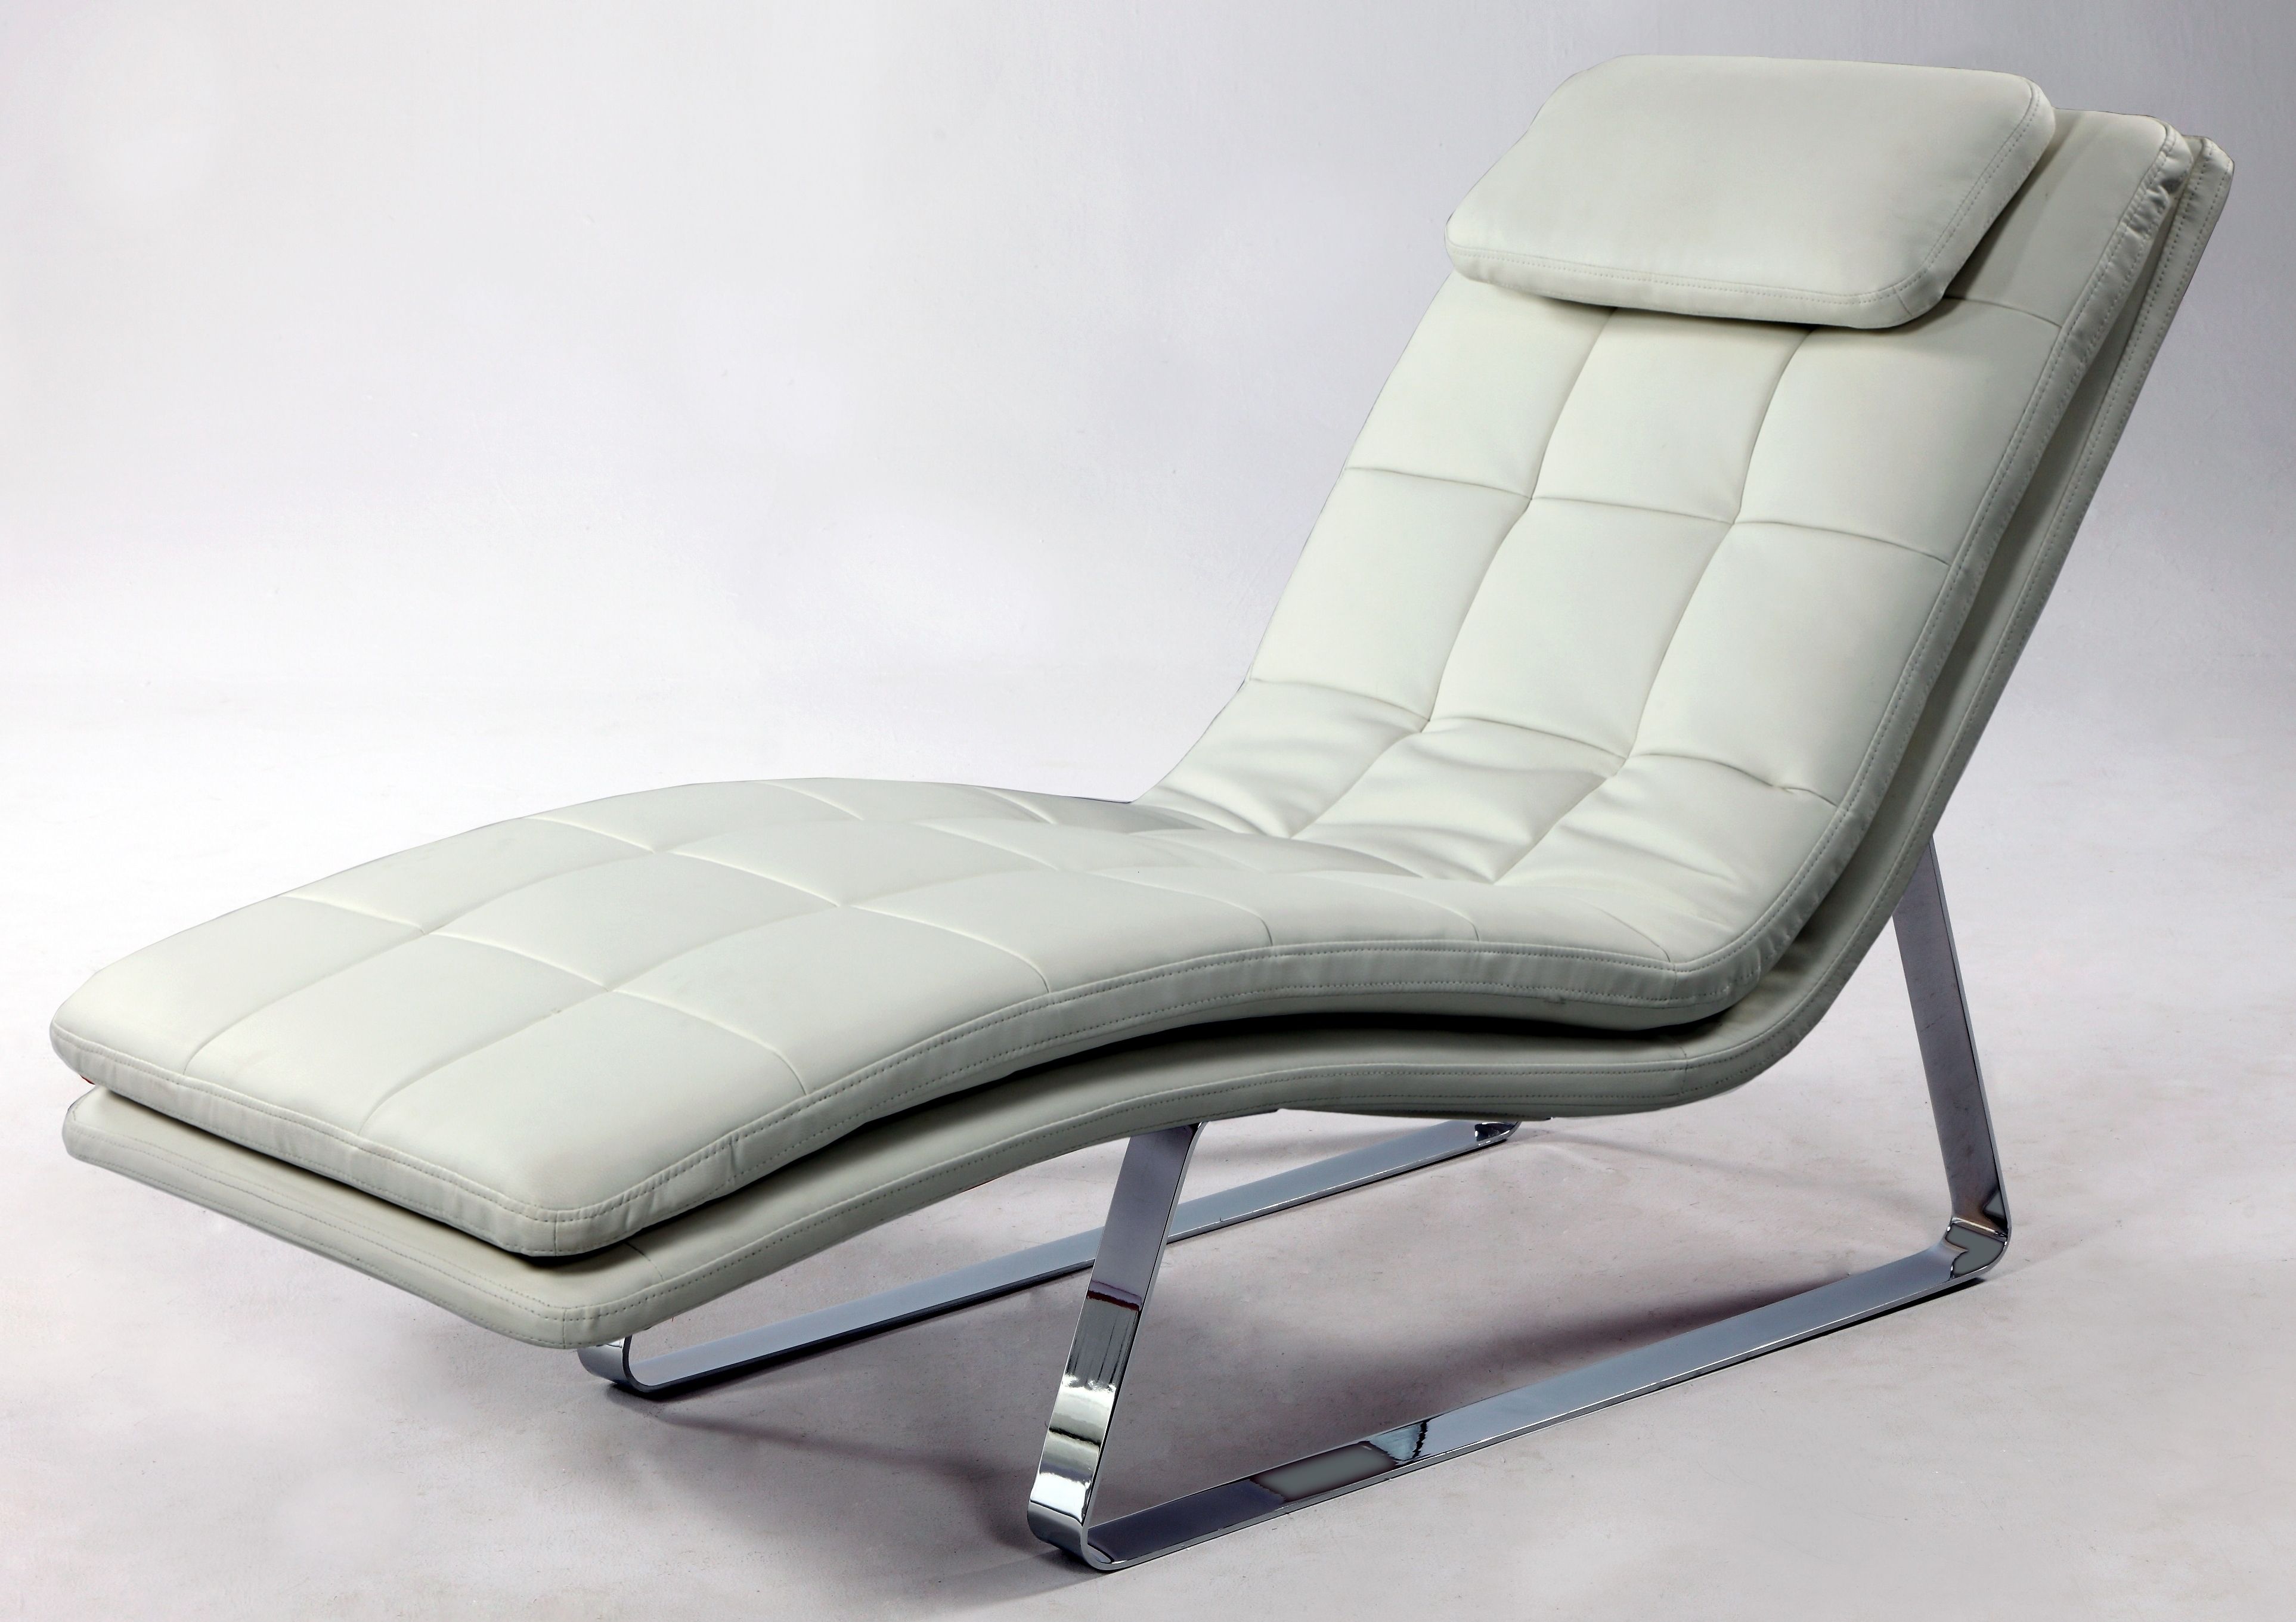 Modern Chaises Within Favorite Full Bonded Leather Tufted Chaise Lounge With Chrome Legs New York (View 6 of 15)